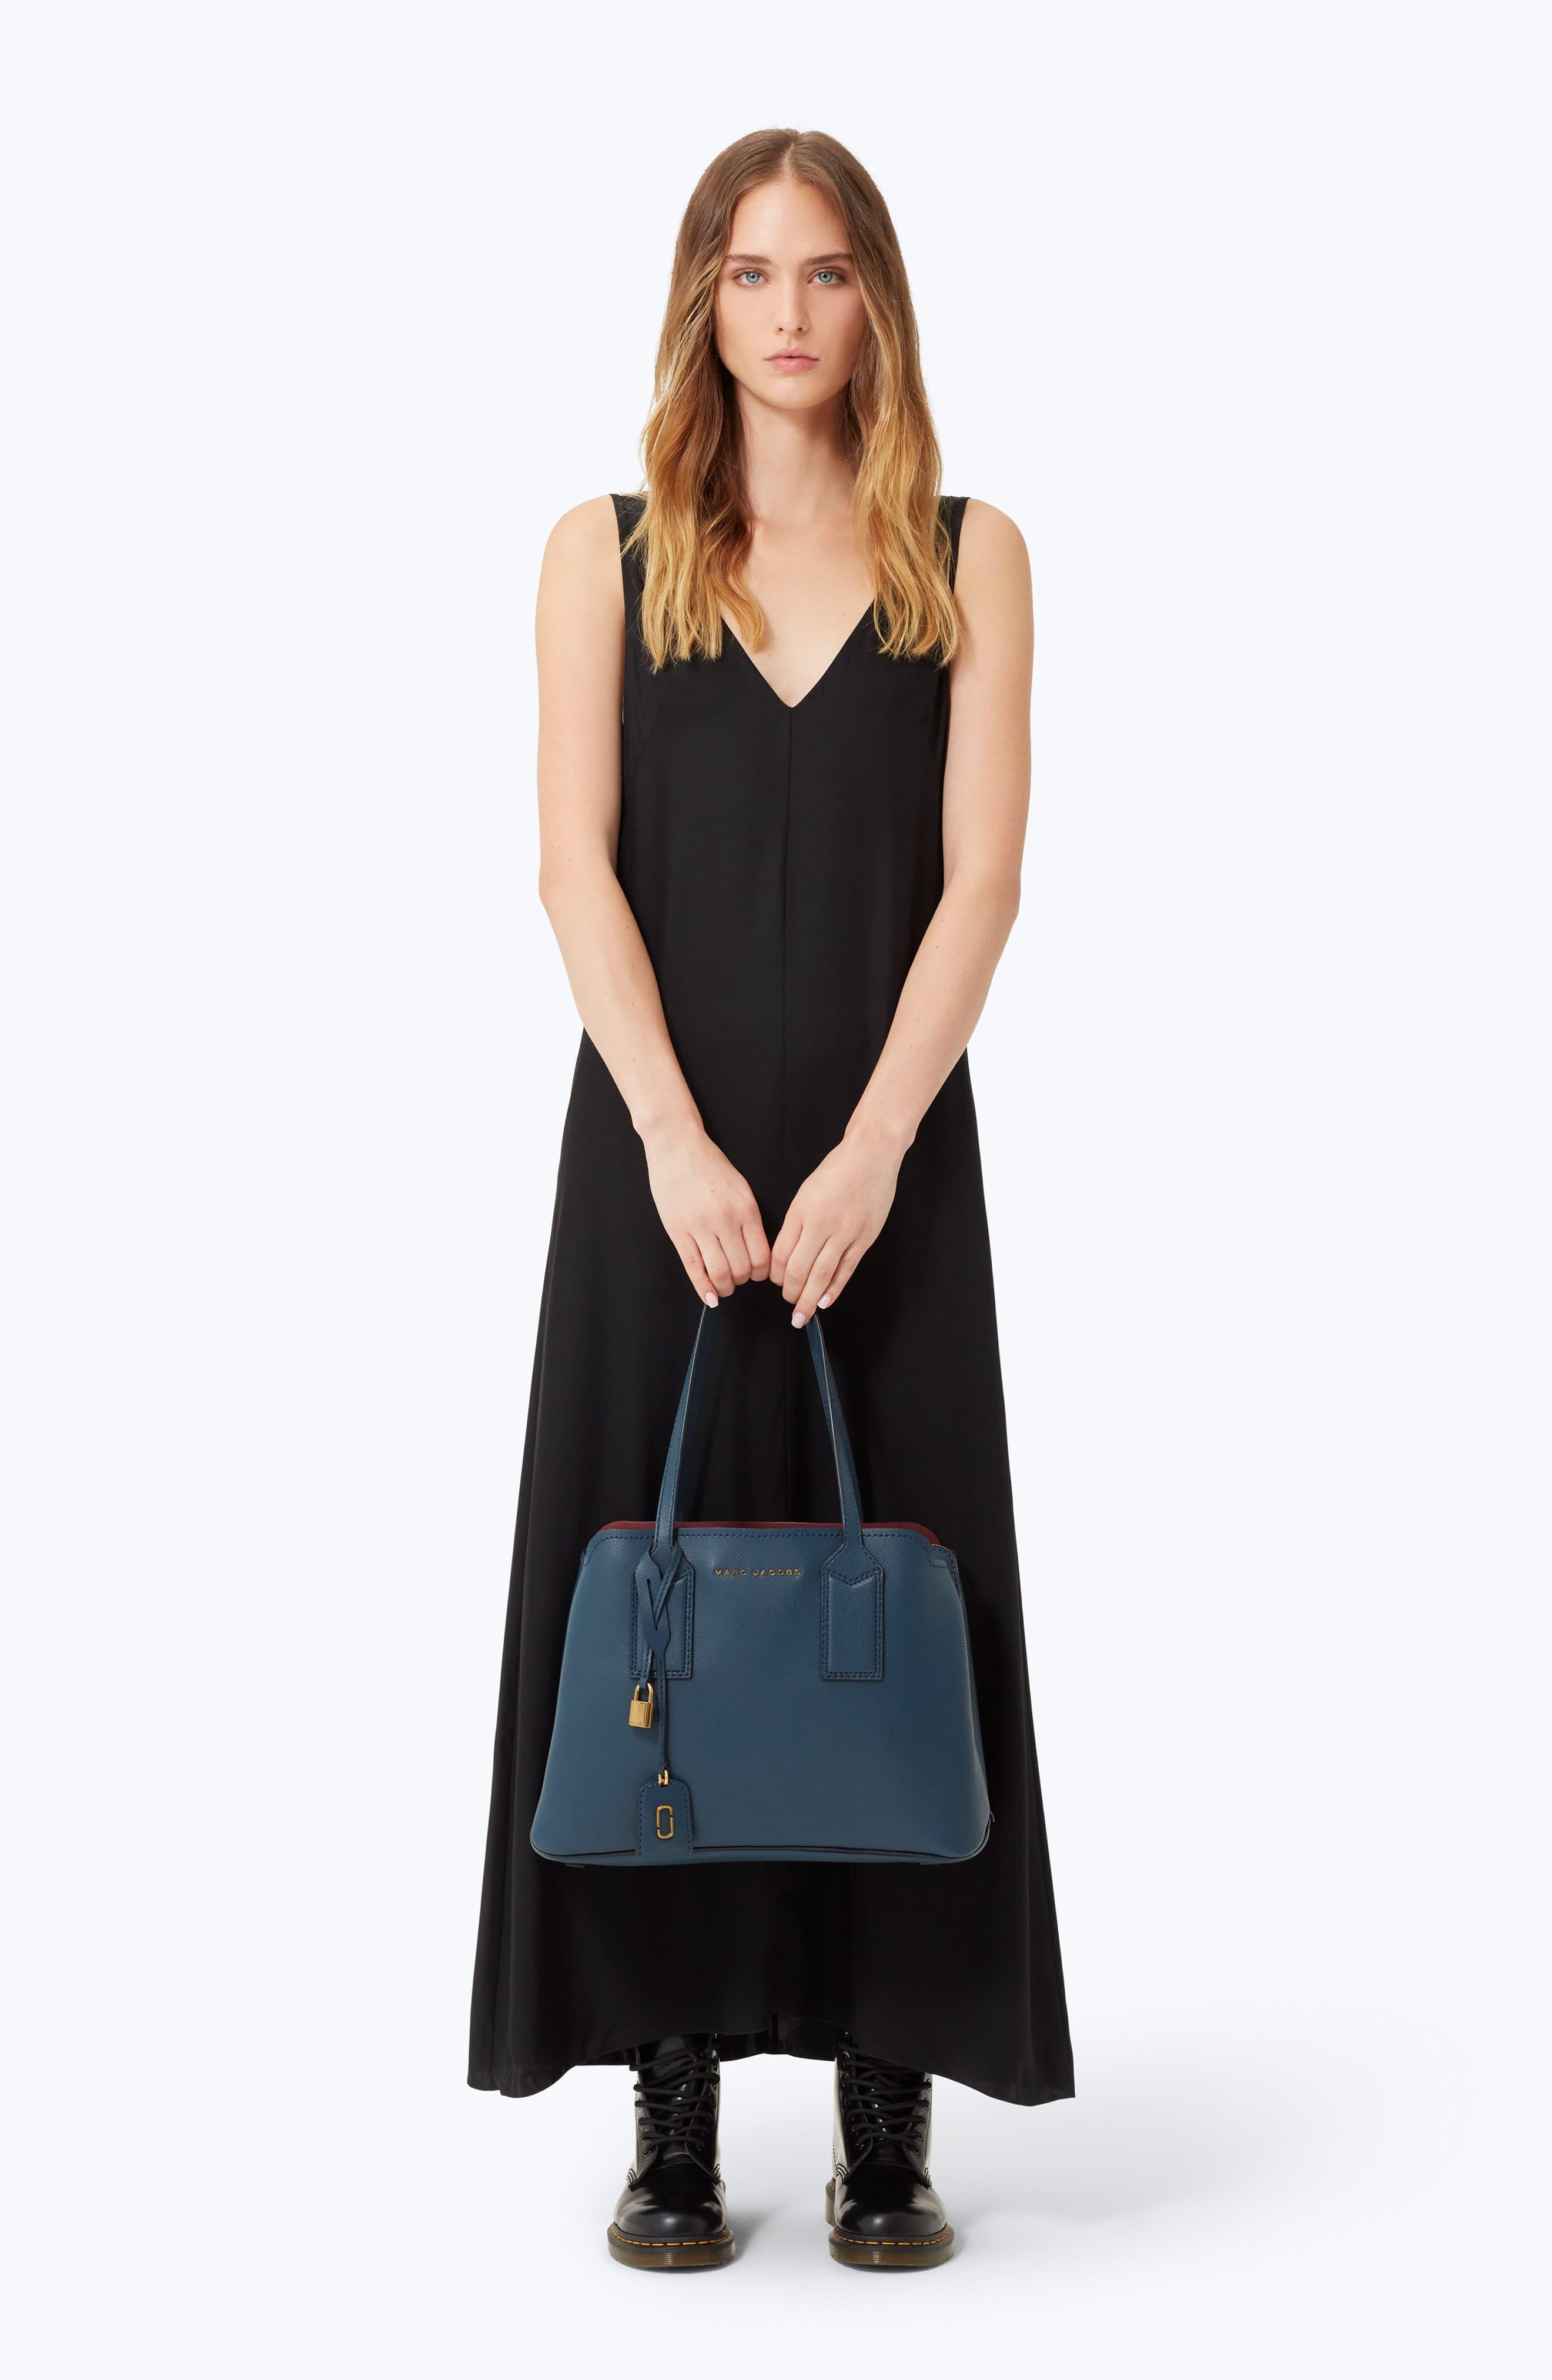 Marc Jacobs The Editor Pebbled Leather Tote Shoulder Bag Retail $495